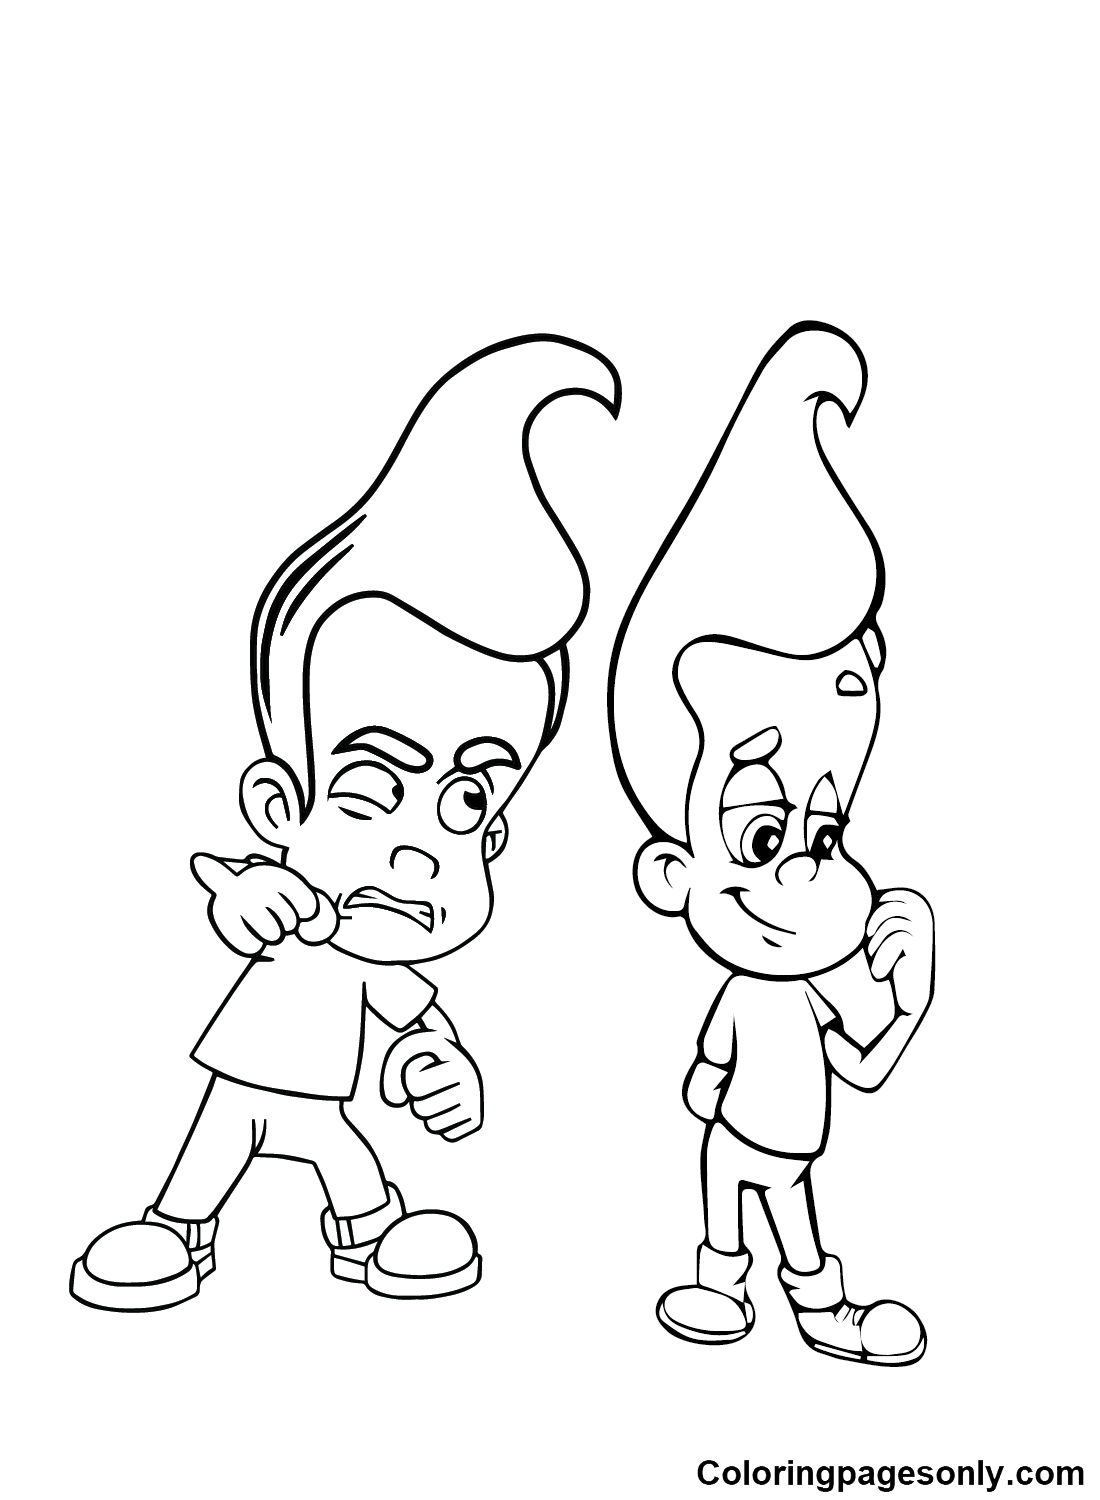 Jimmy Neutron Characters Coloring Page